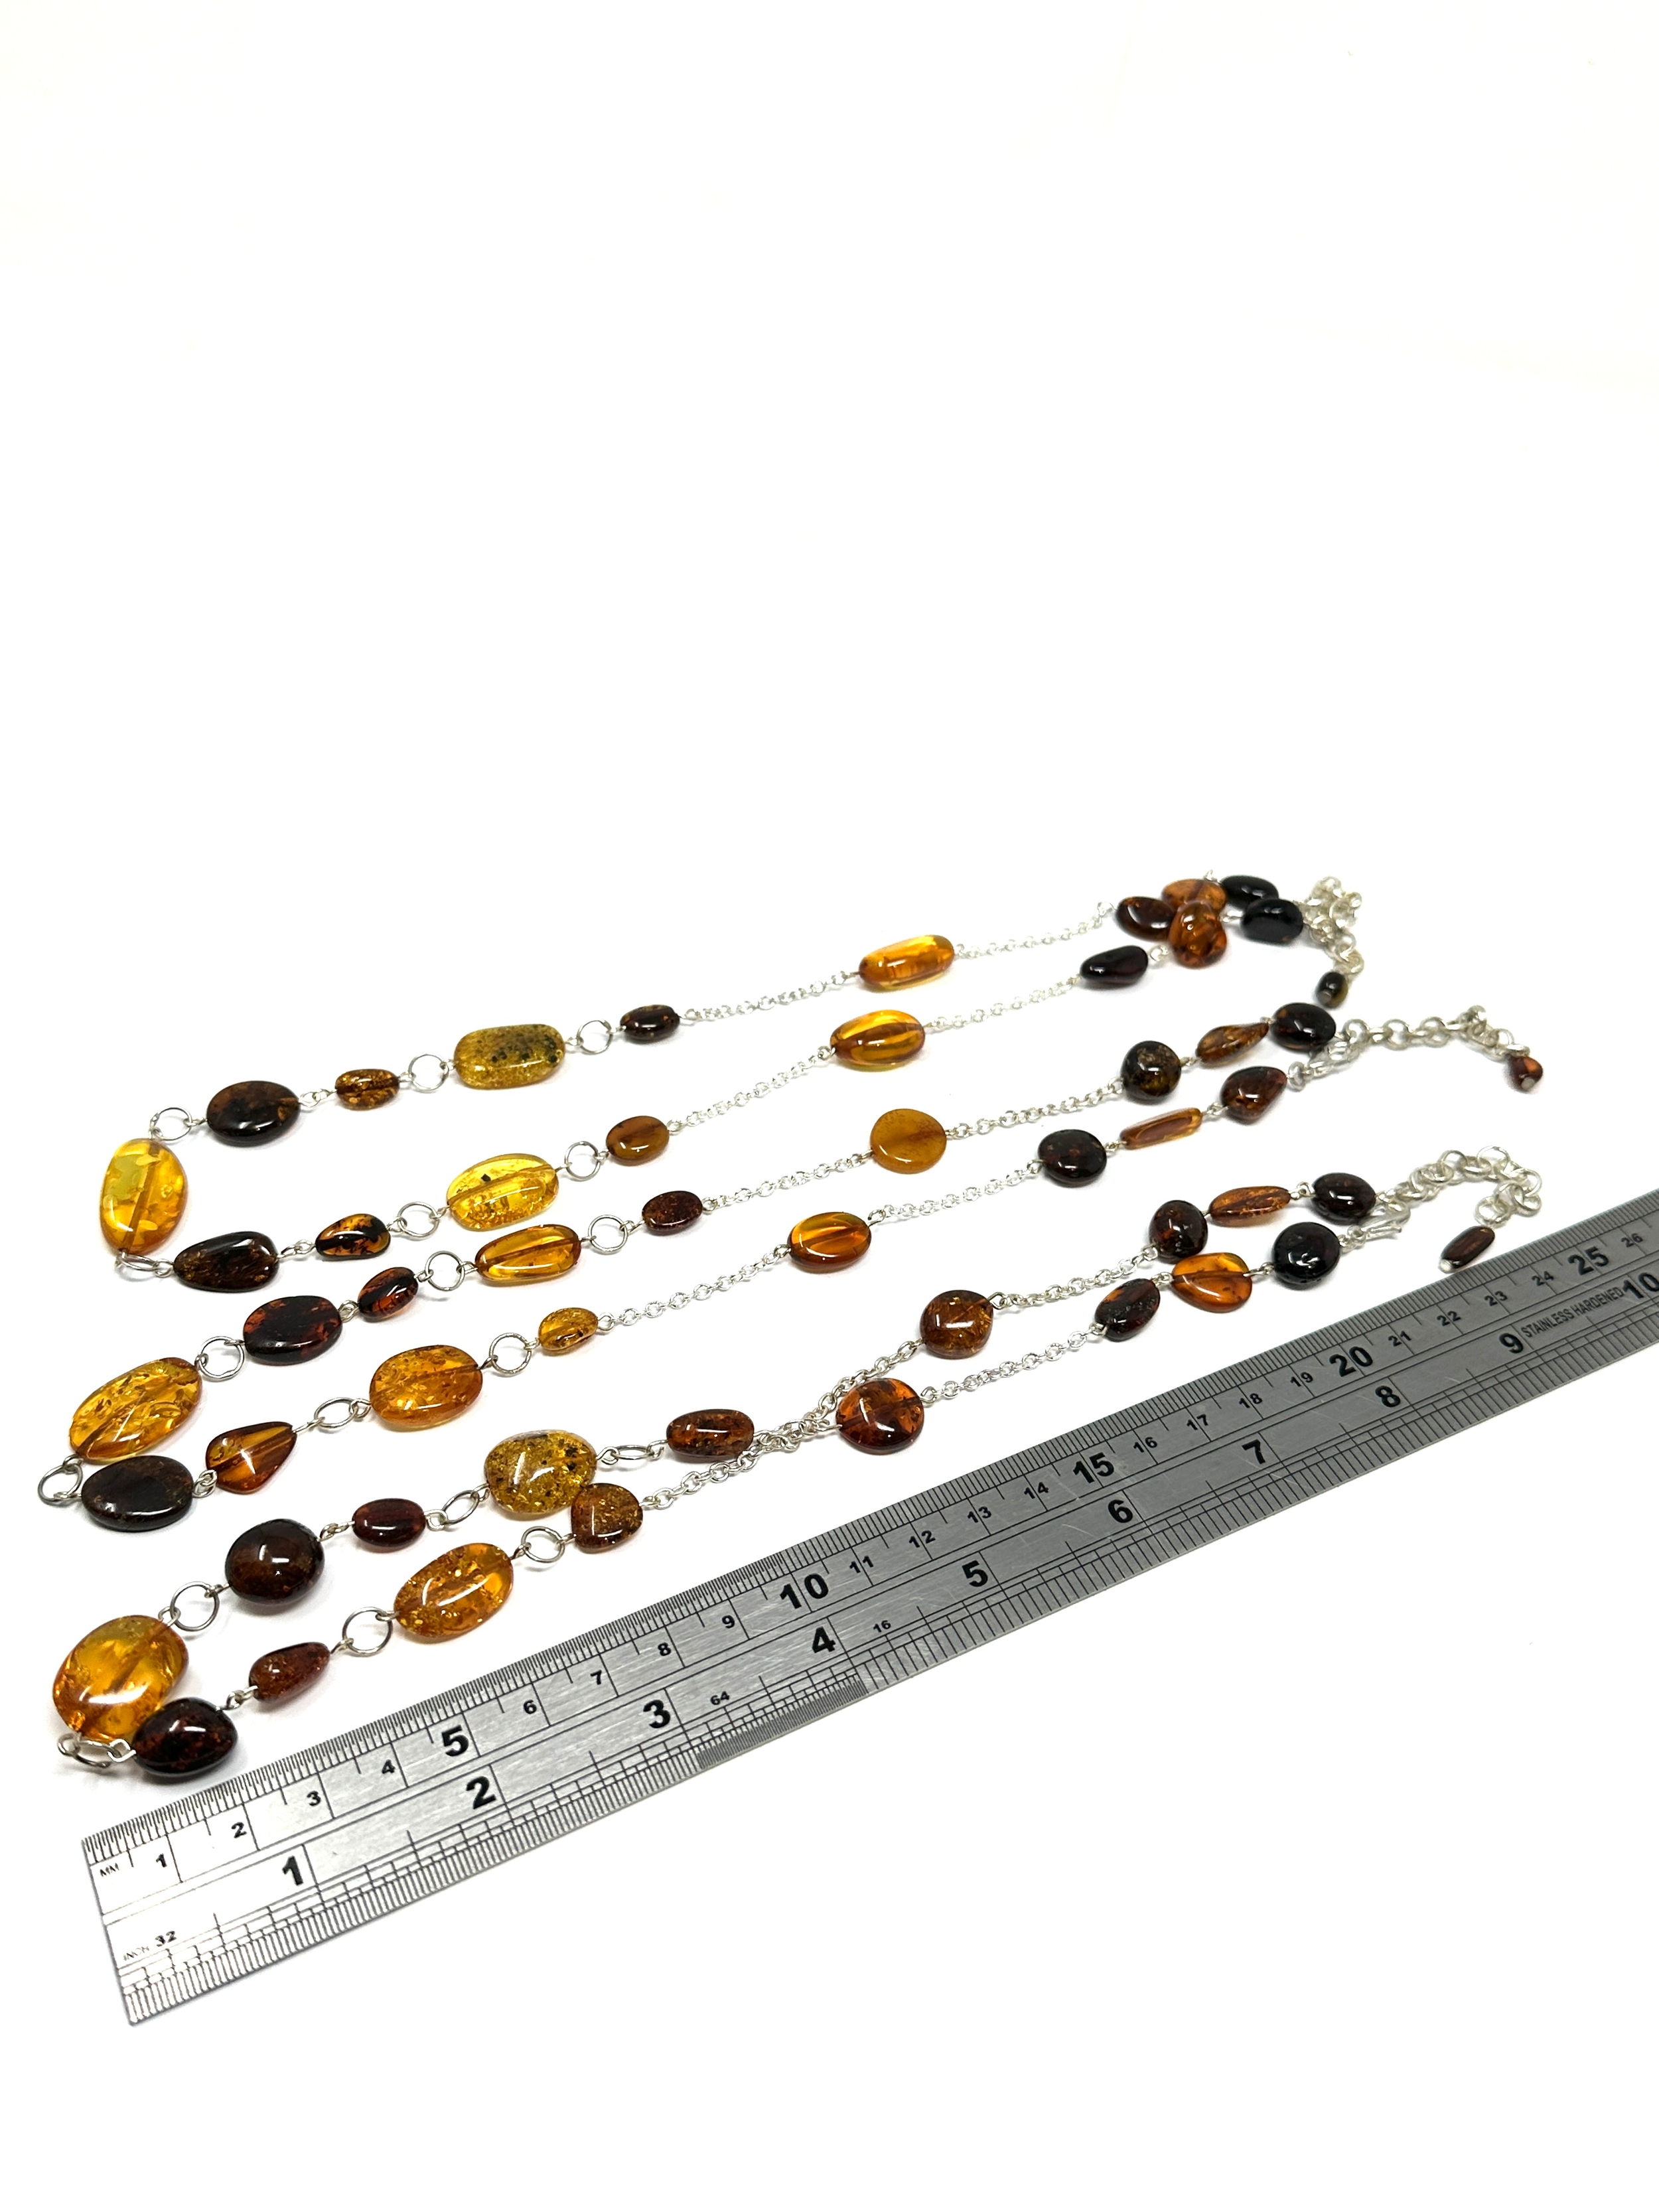 3 silver & amber necklaces weight 48g - Image 3 of 3